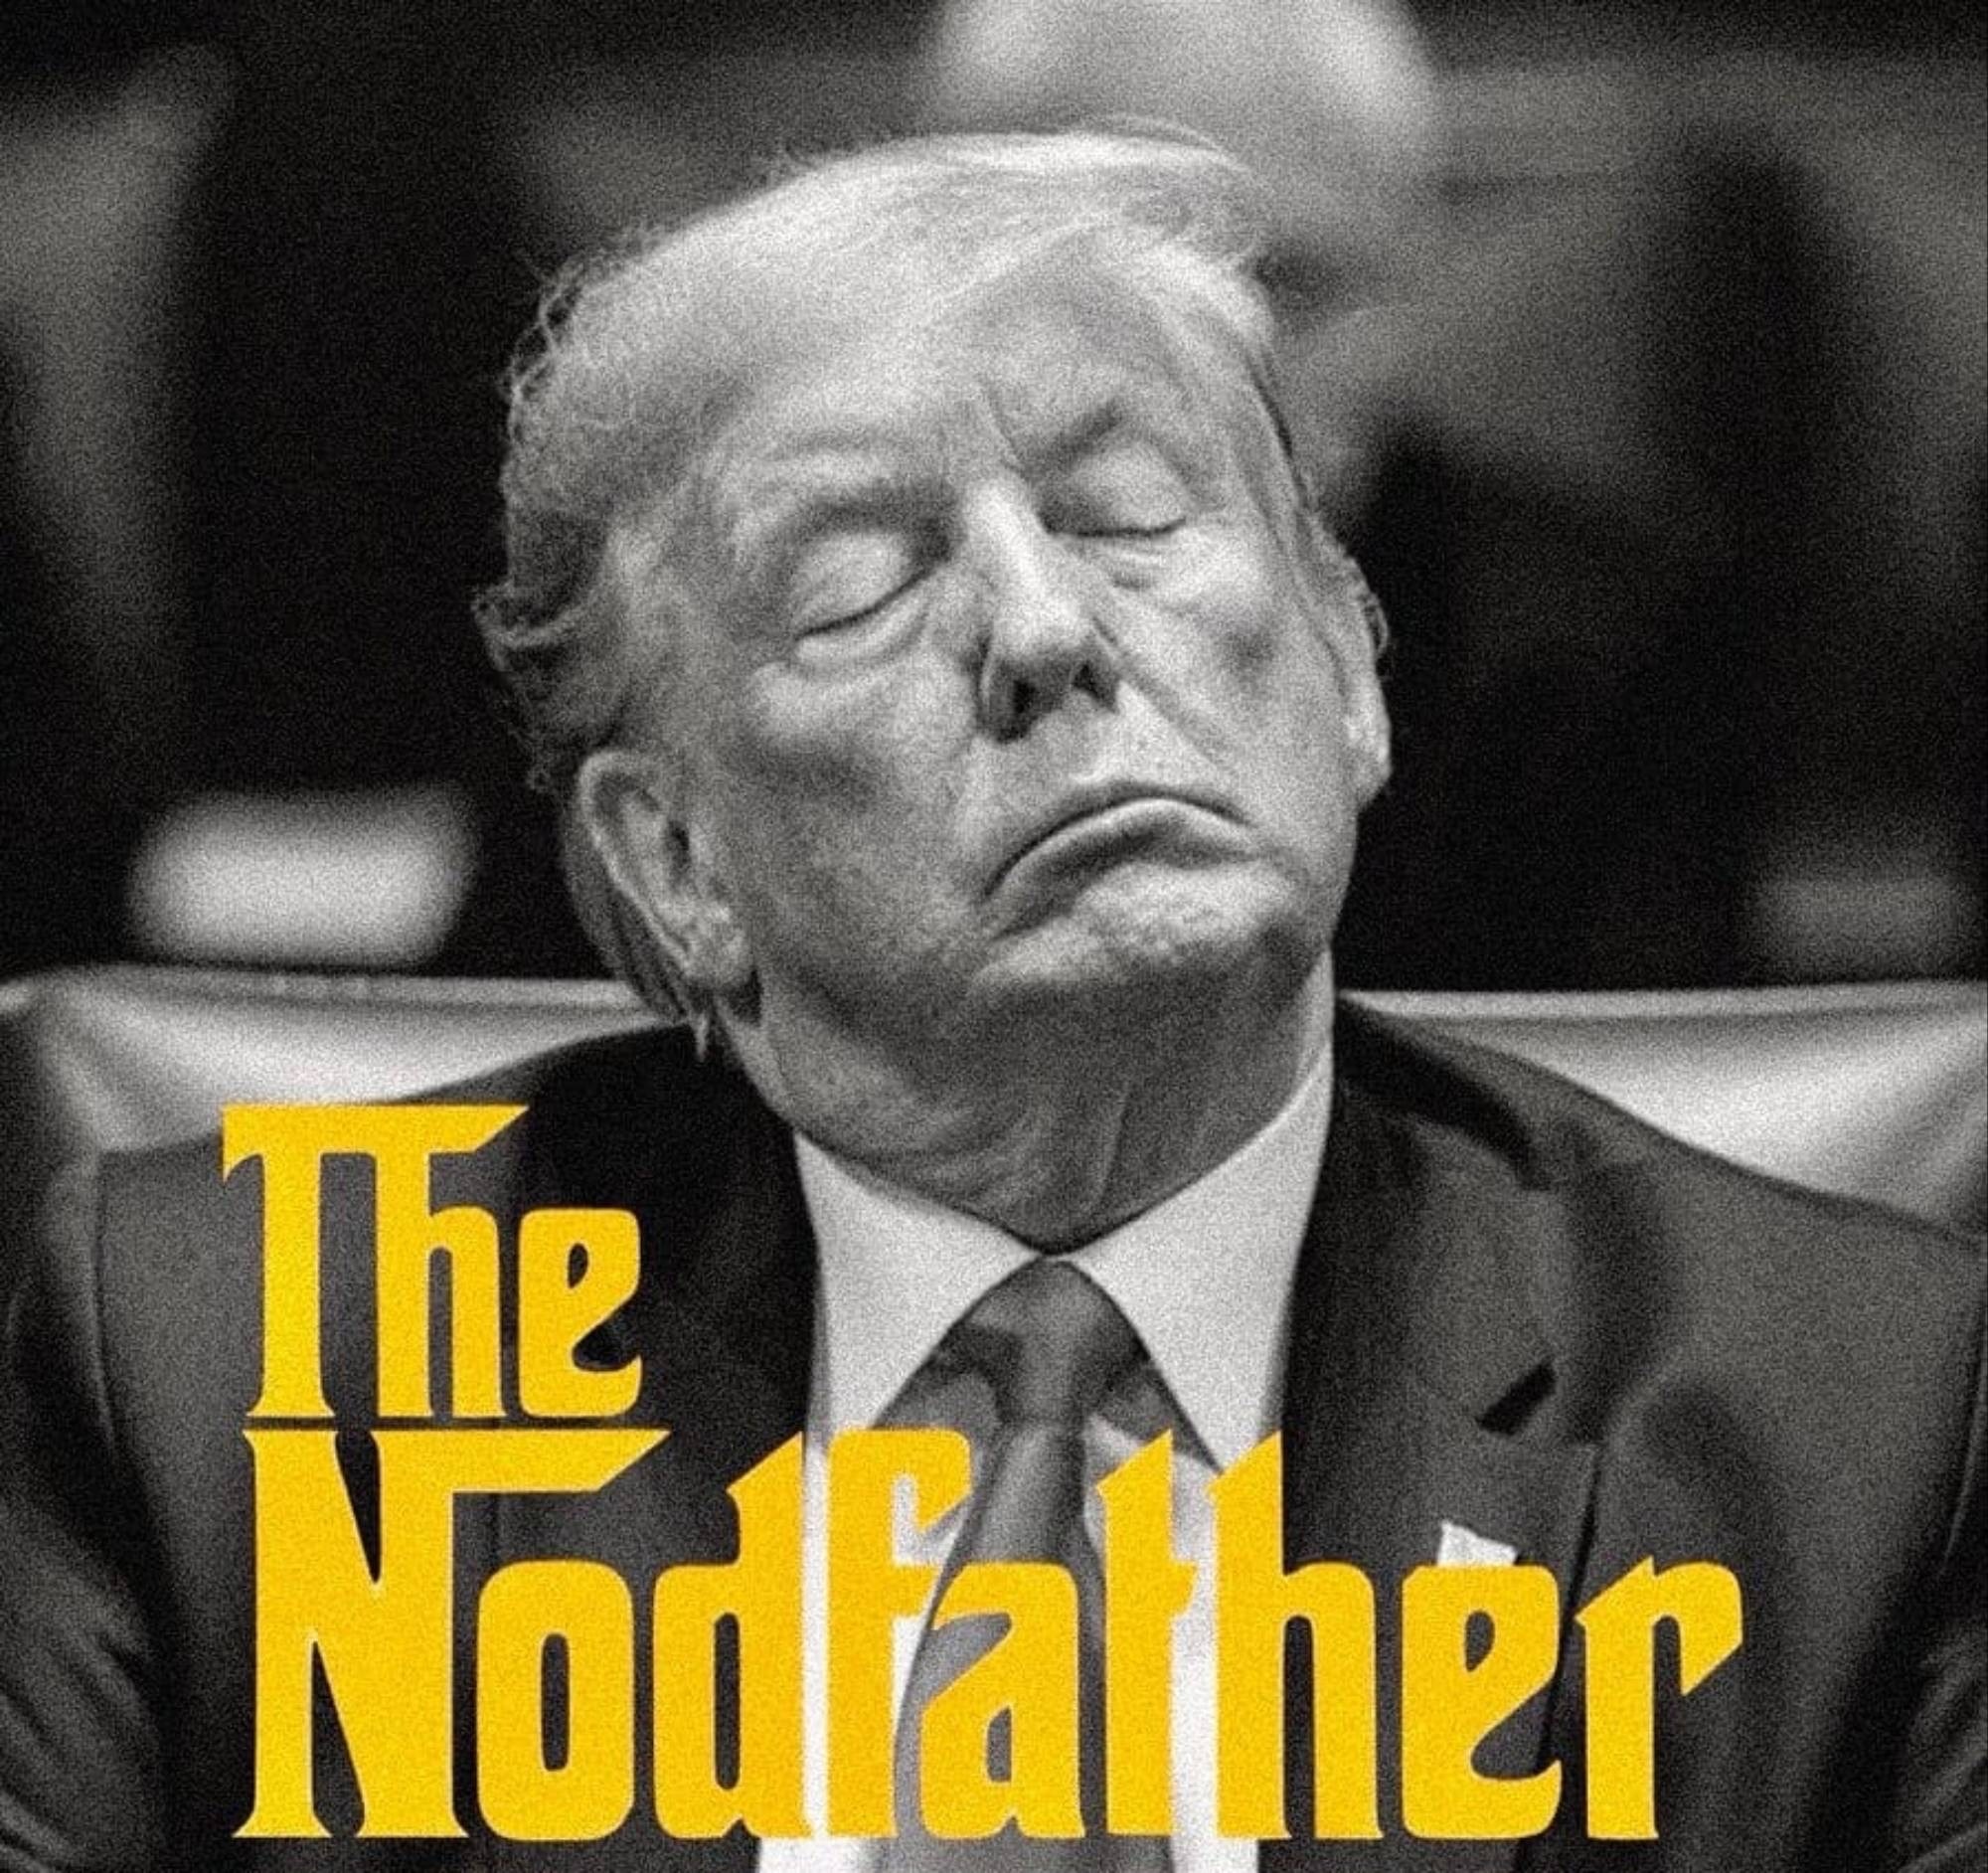 a picture where Donald Trump appears to be dozing with “The Nodfather” in the logo font for “The Godfather”